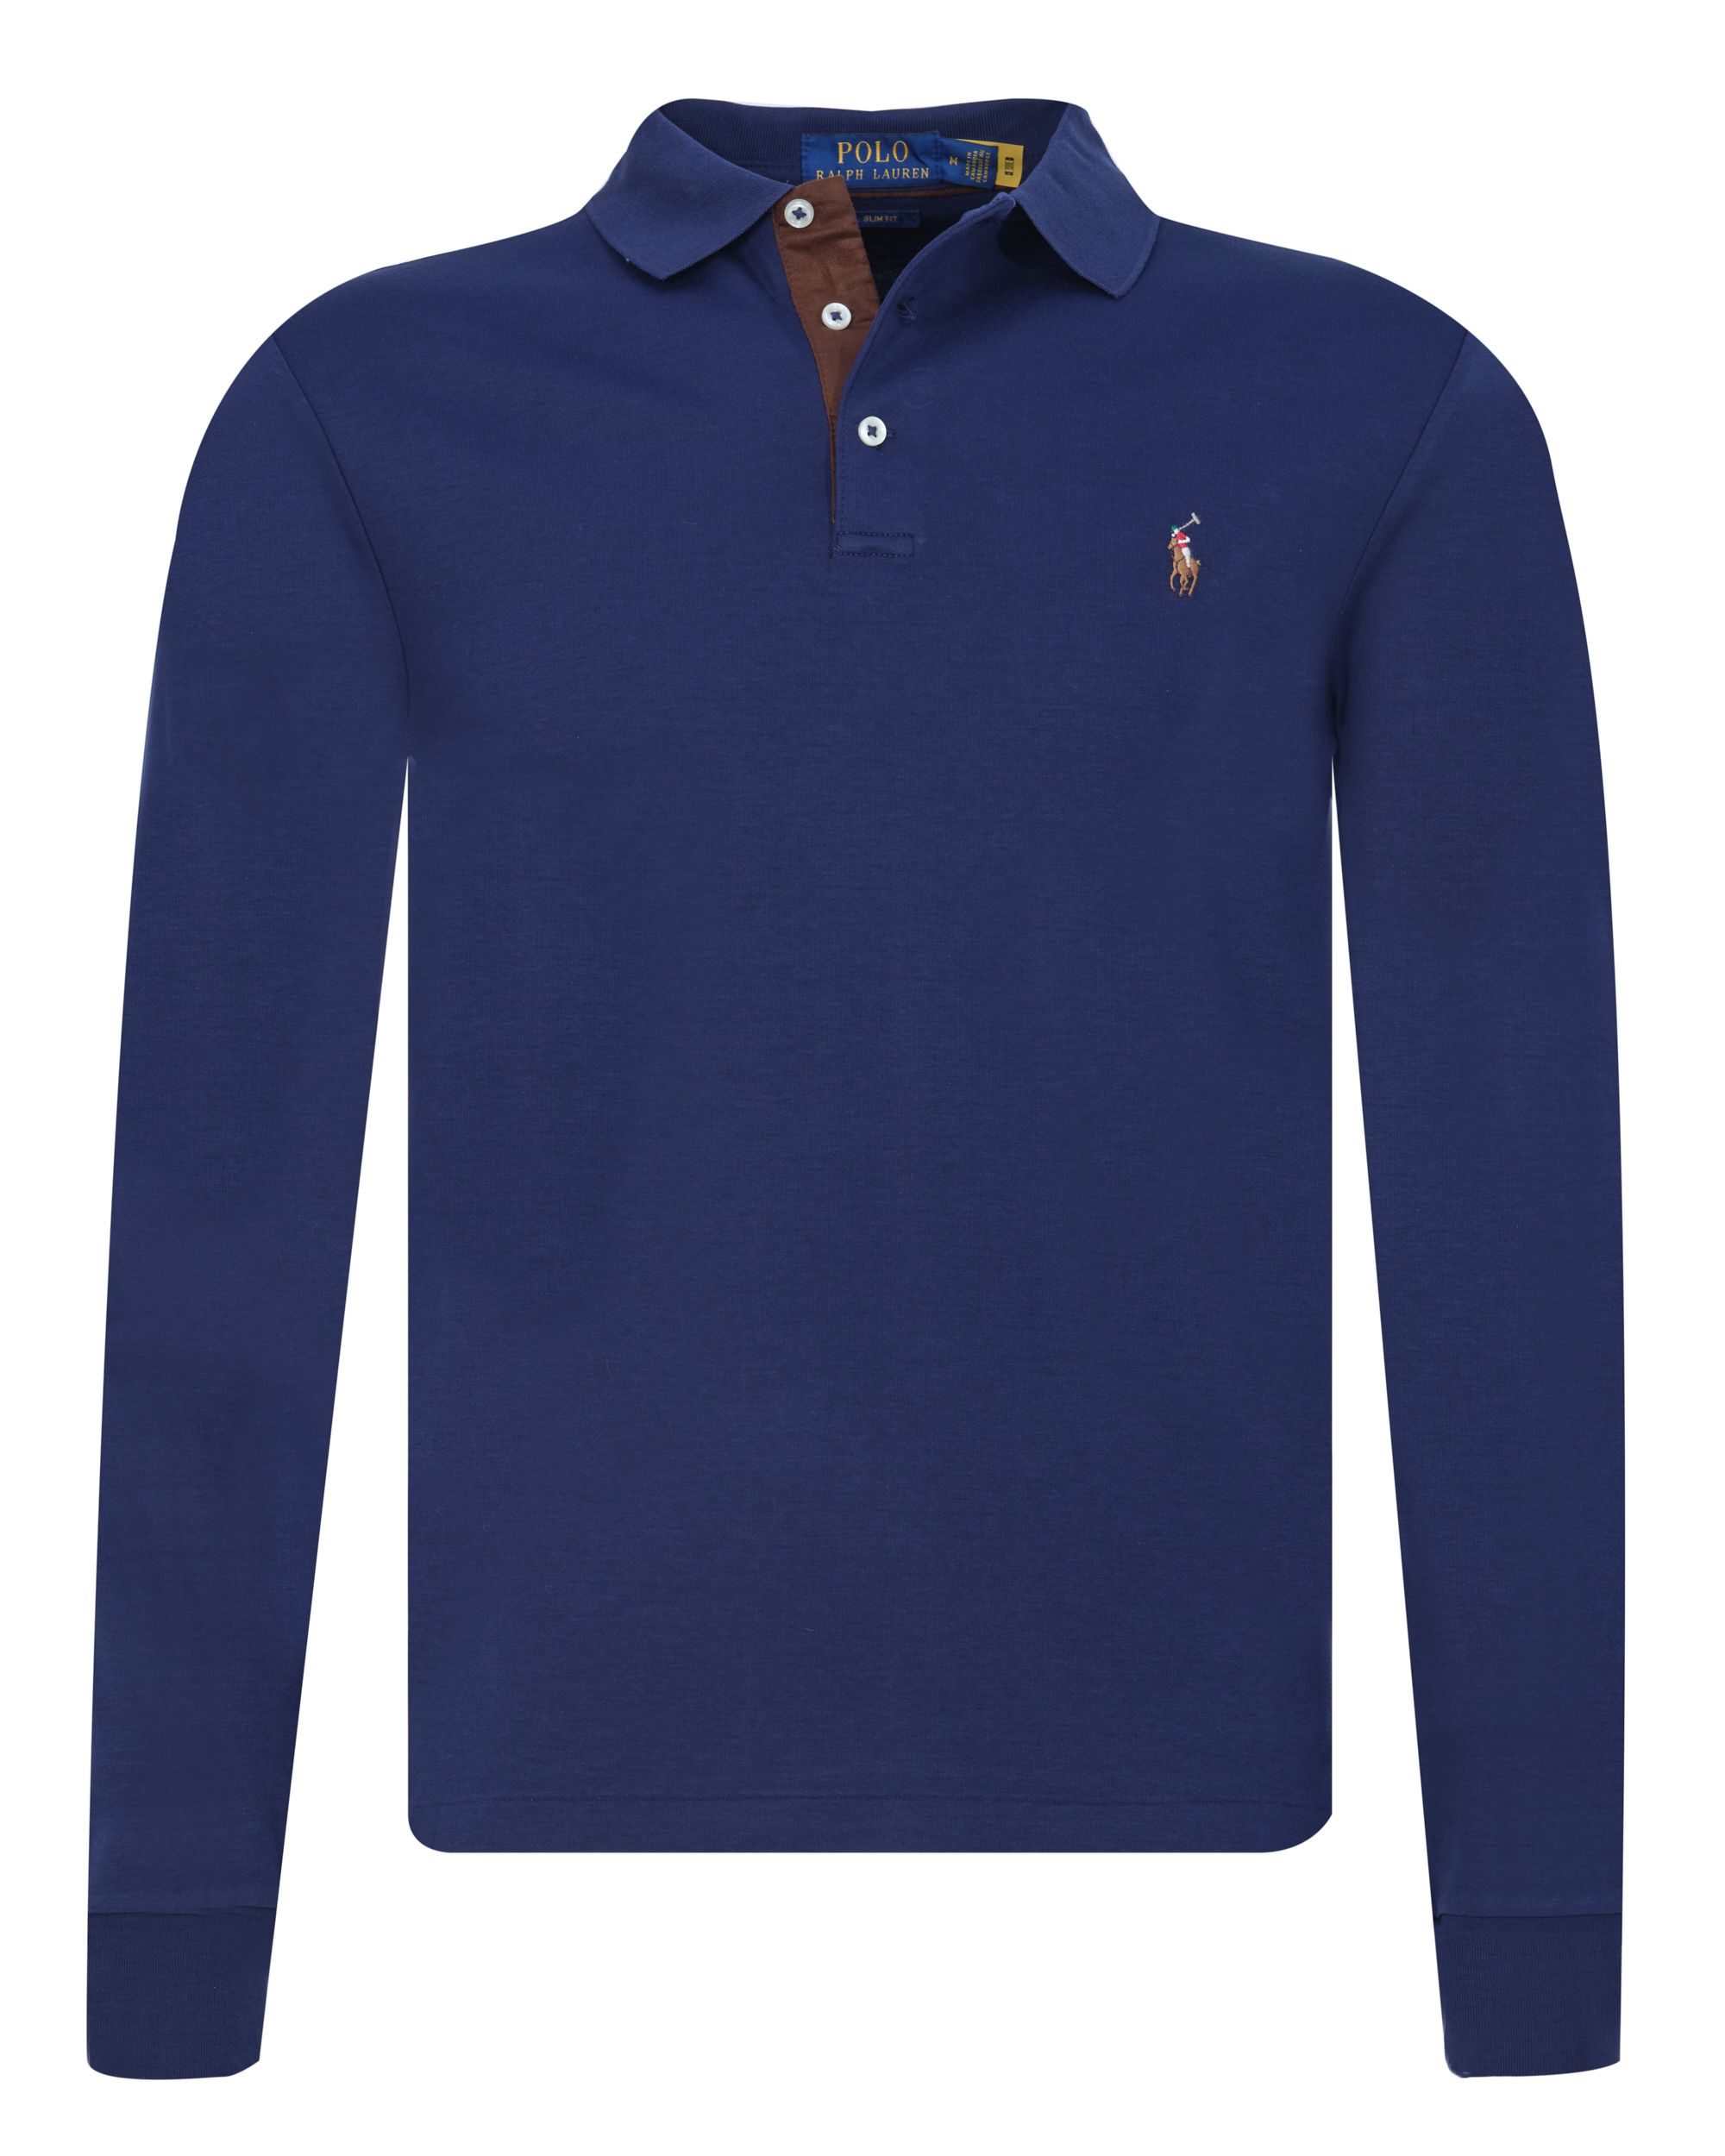 Polo Ralph Lauren Polo LM Donker blauw 080562-001-L